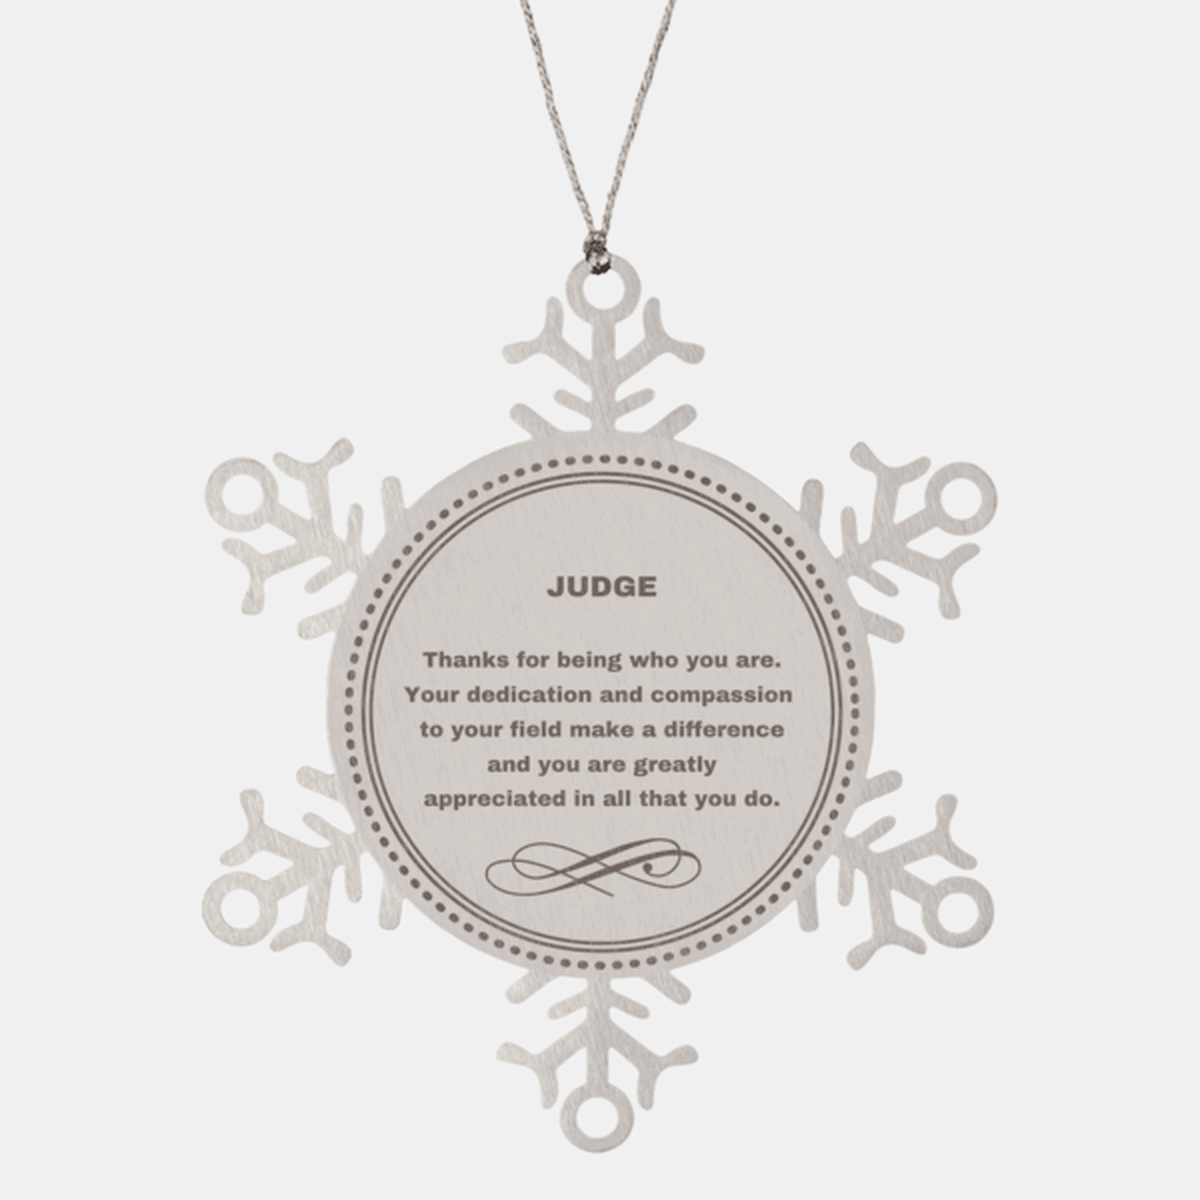 Judge Snowflake Ornament - Thanks for being who you are - Birthday Christmas Jewelry Gifts Coworkers Colleague Boss - Mallard Moon Gift Shop